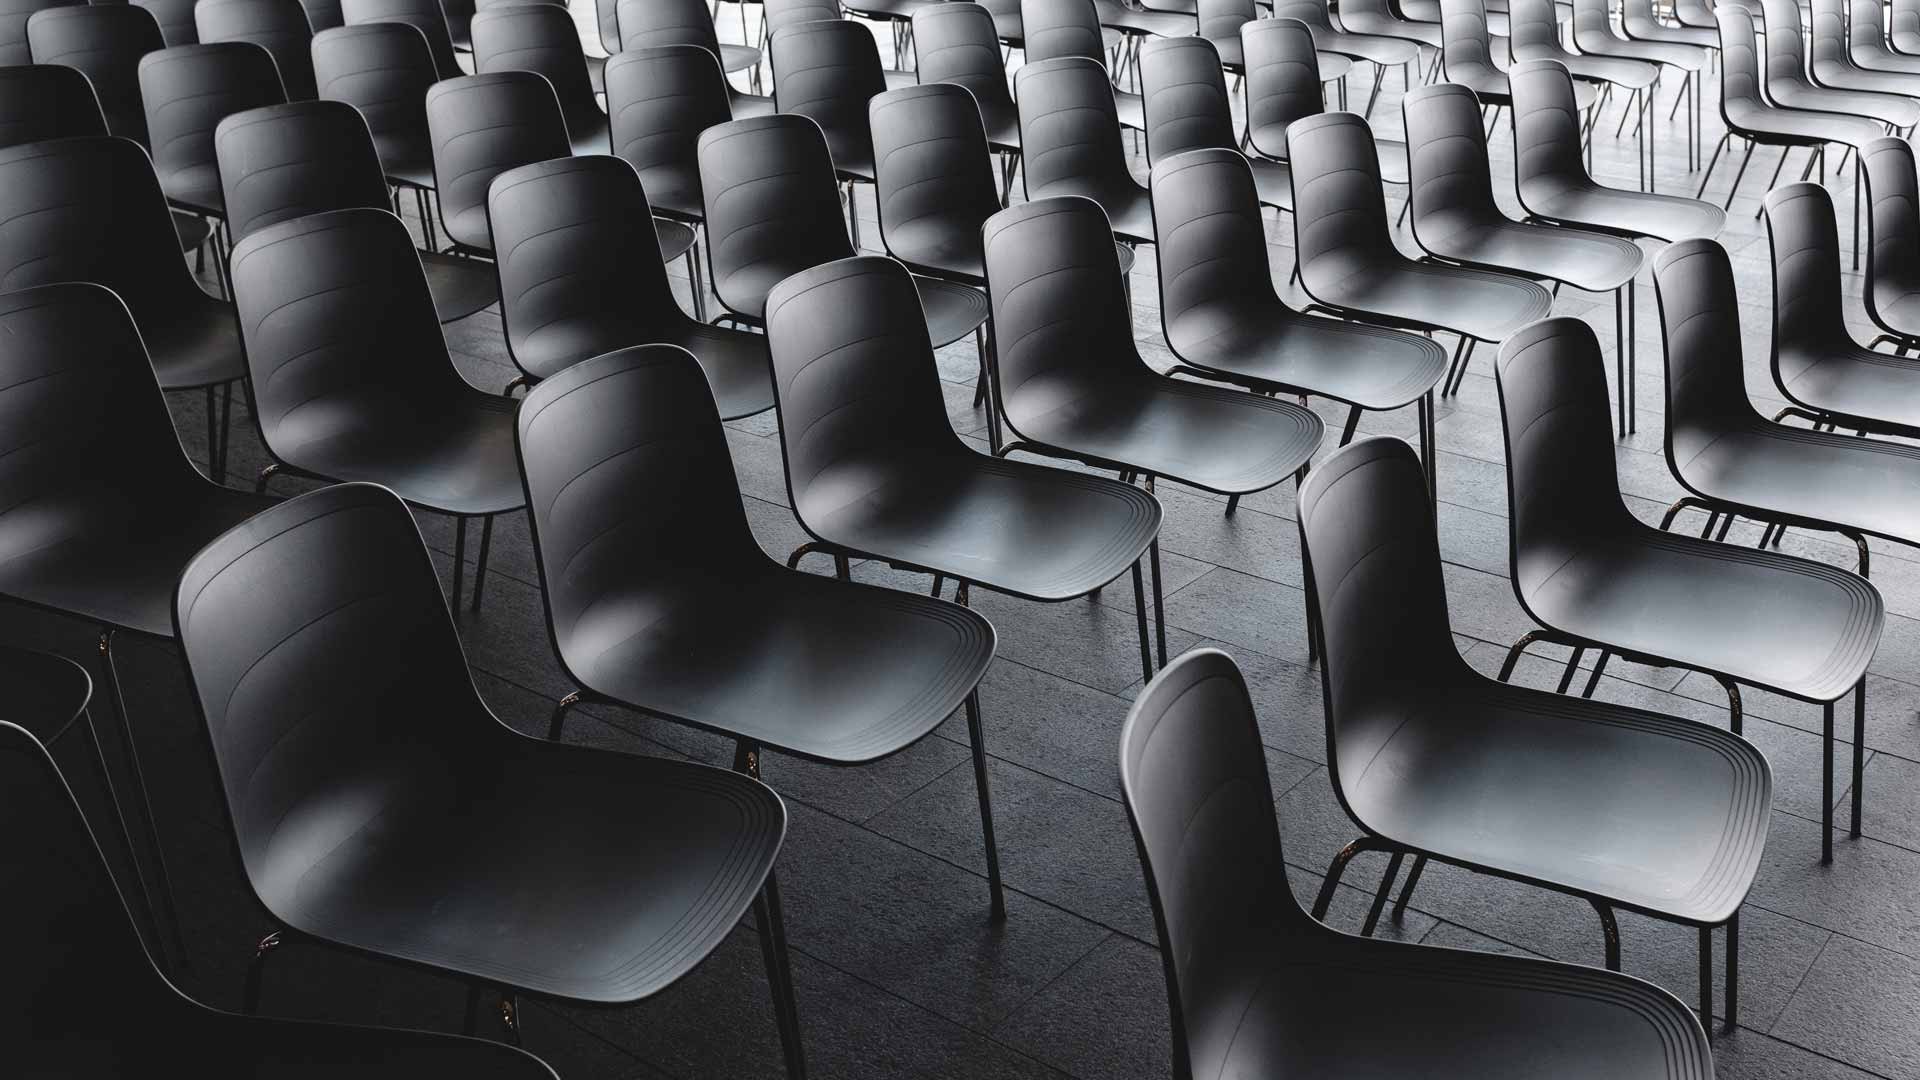 5 Ways Marketers Can Still Benefit from a Canceled Conference